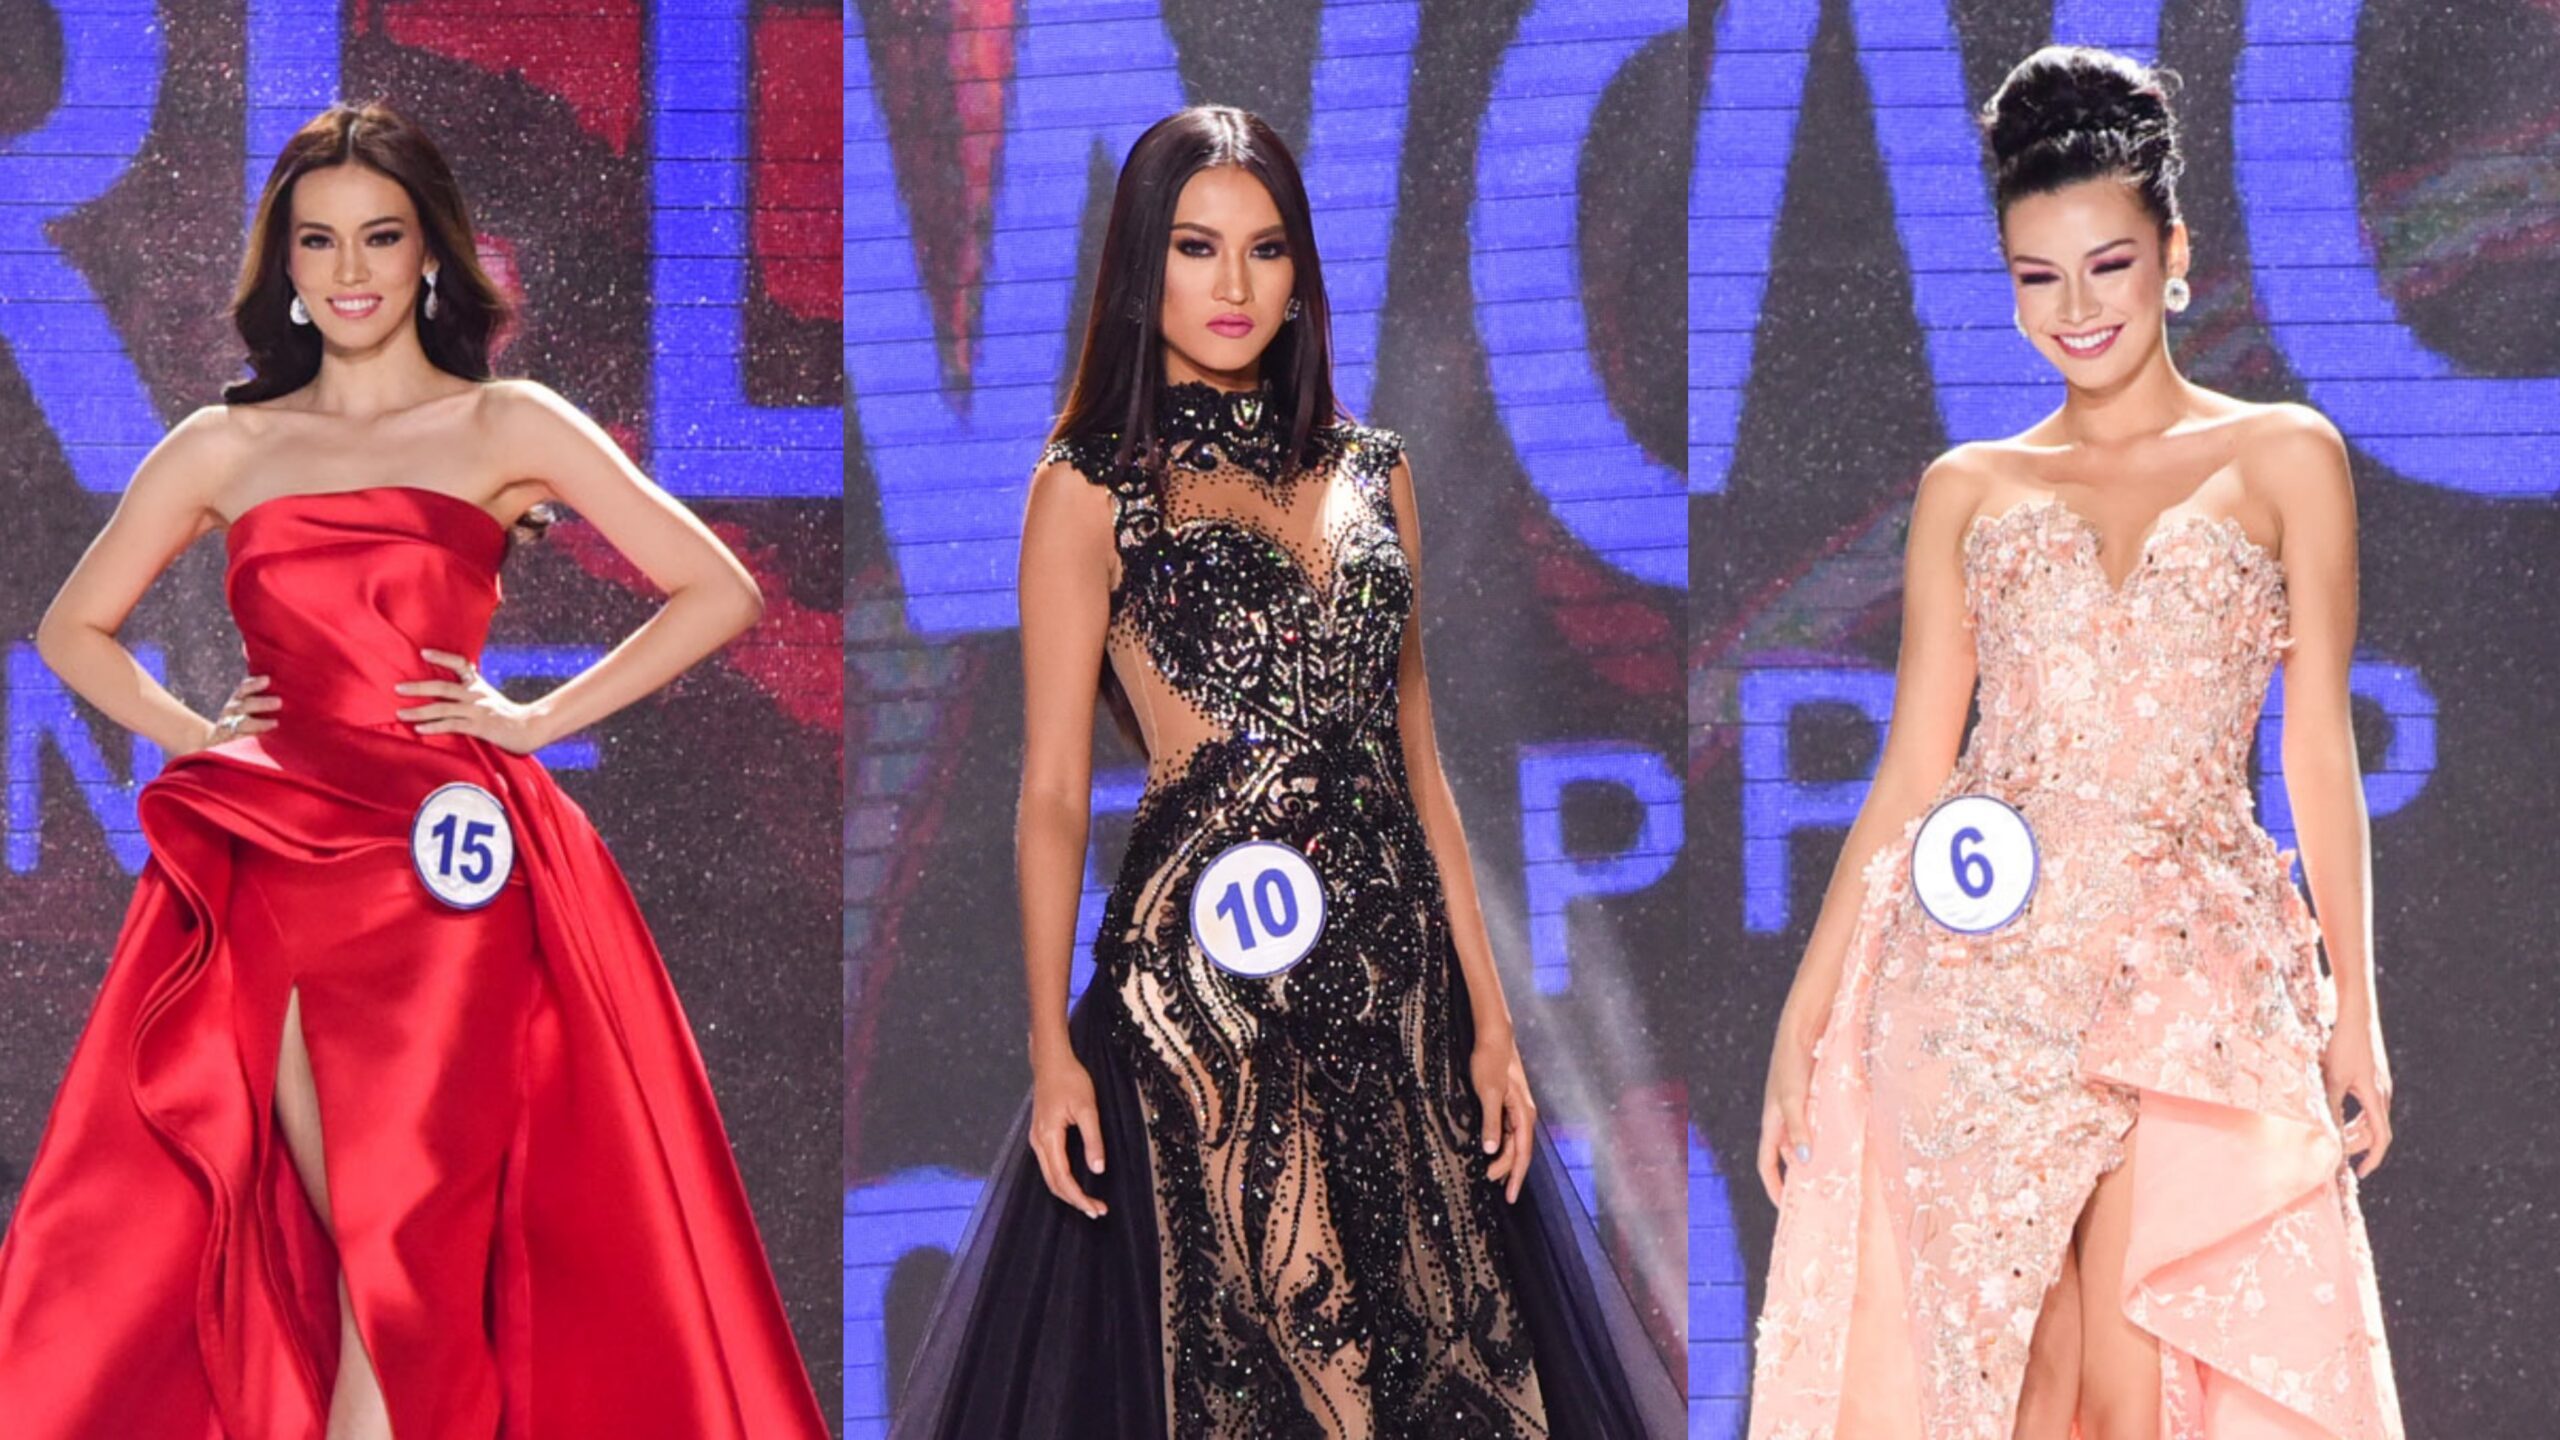 IN PHOTOS: Top 6 gowns at Miss World Philippines 2017